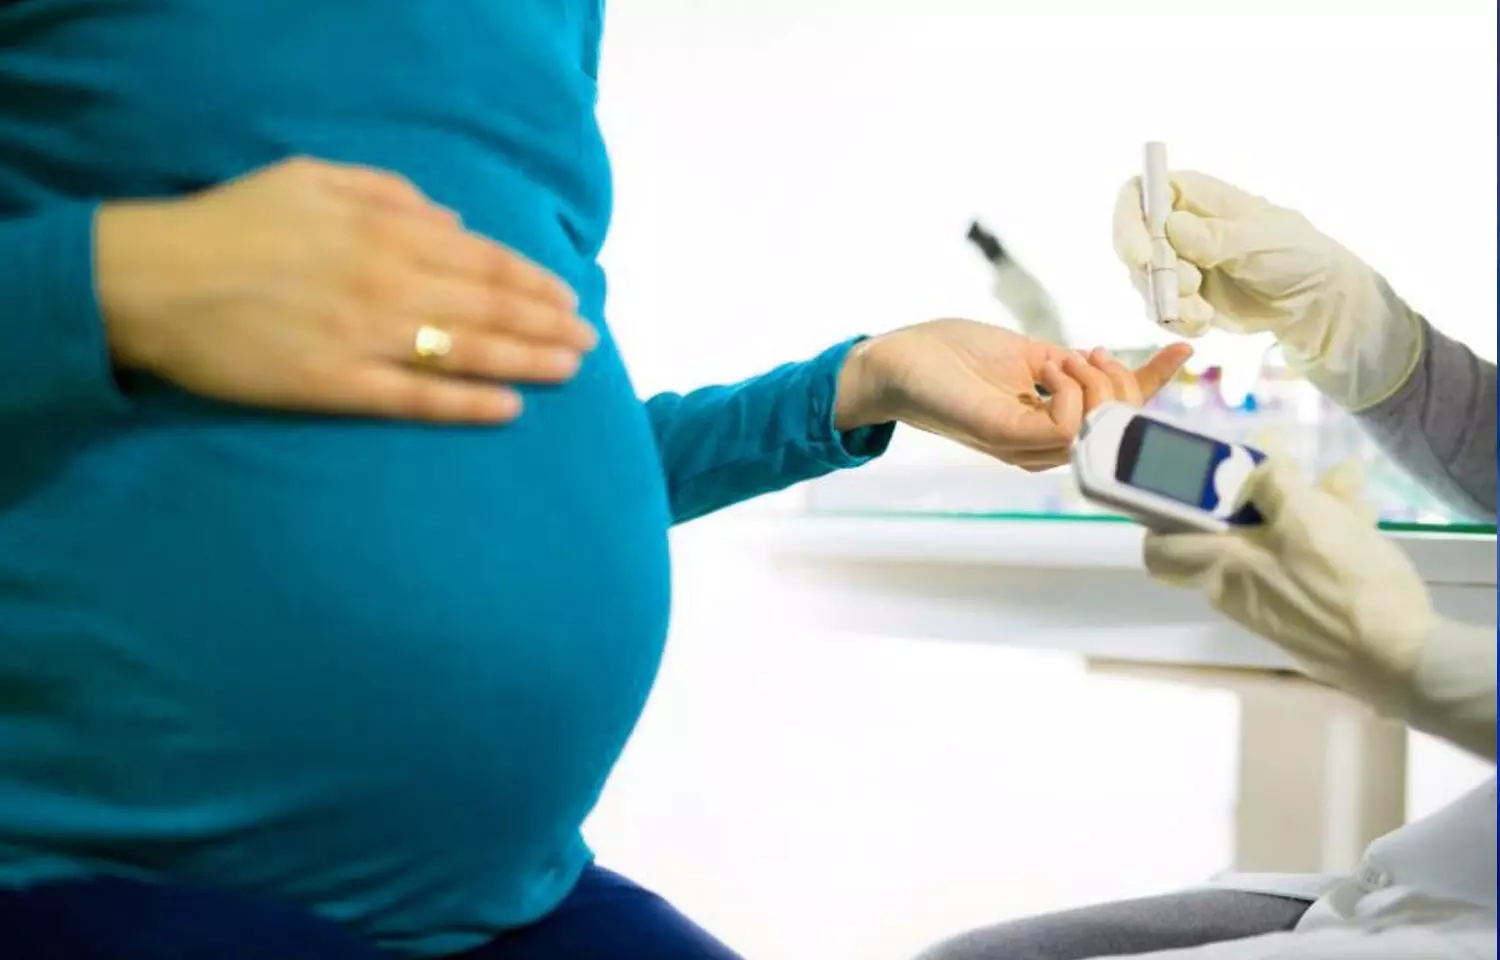 The 5:2 diet - a good choice for weight loss in gestational diabetes